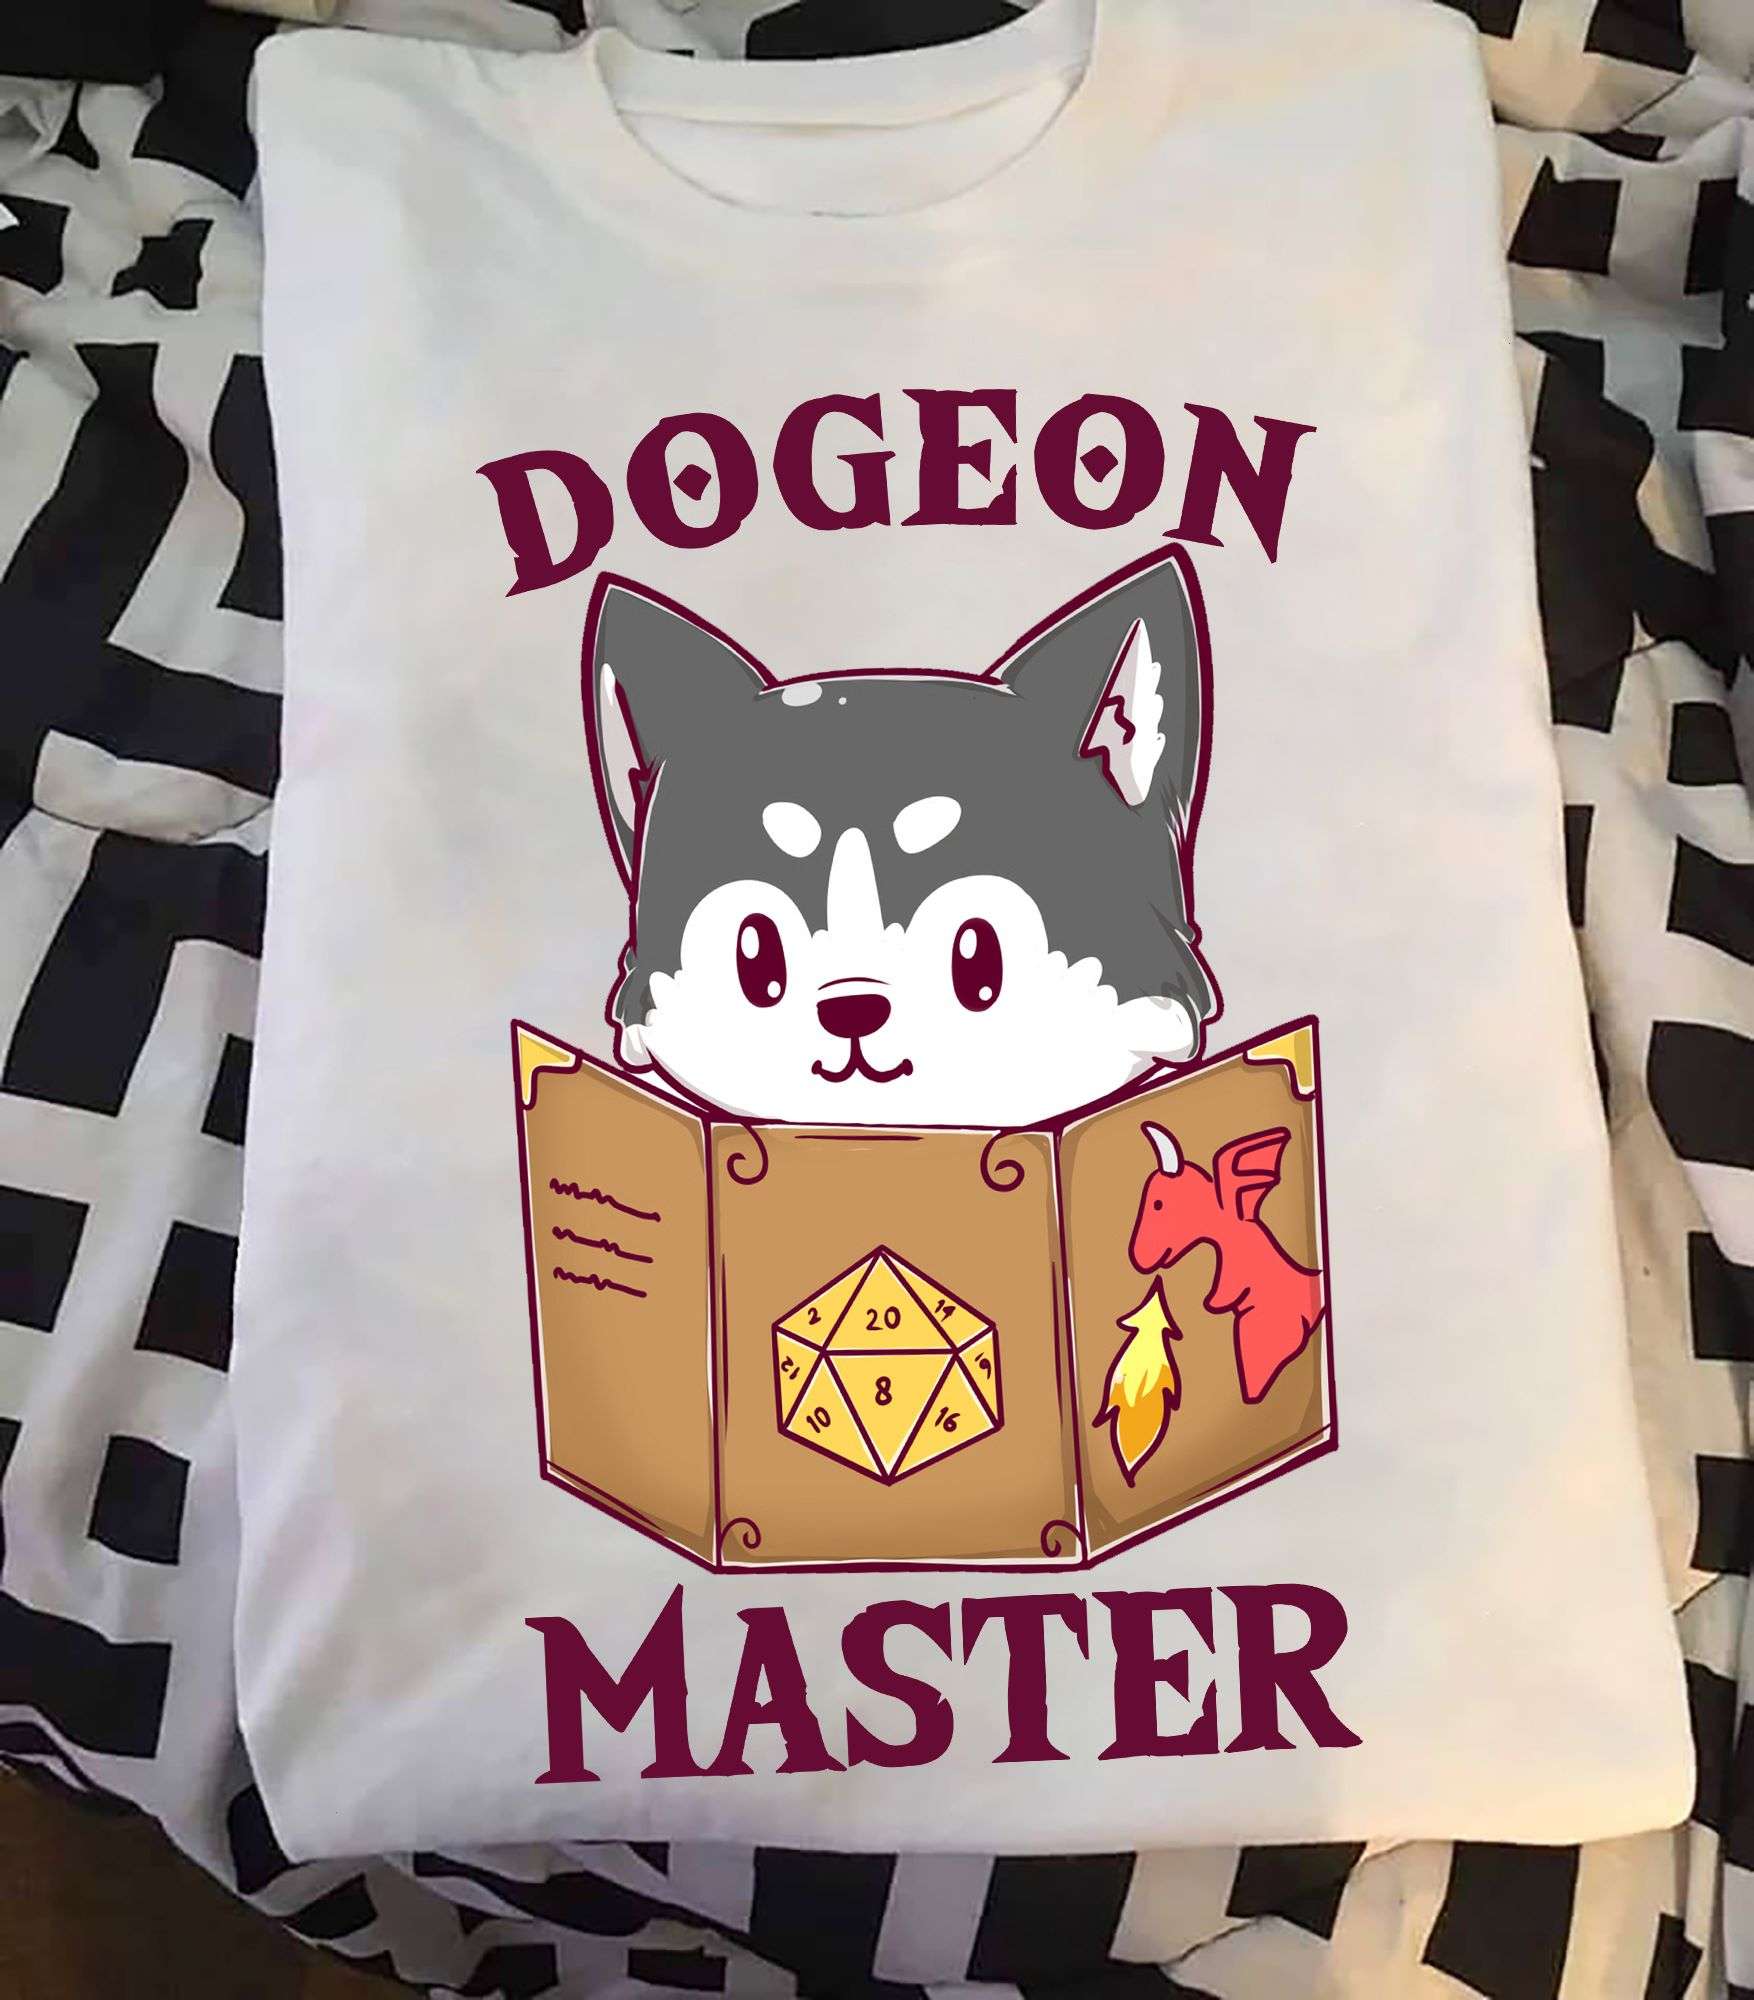 Dogeon master - Dungeons and Dragons, Gorgeous husky